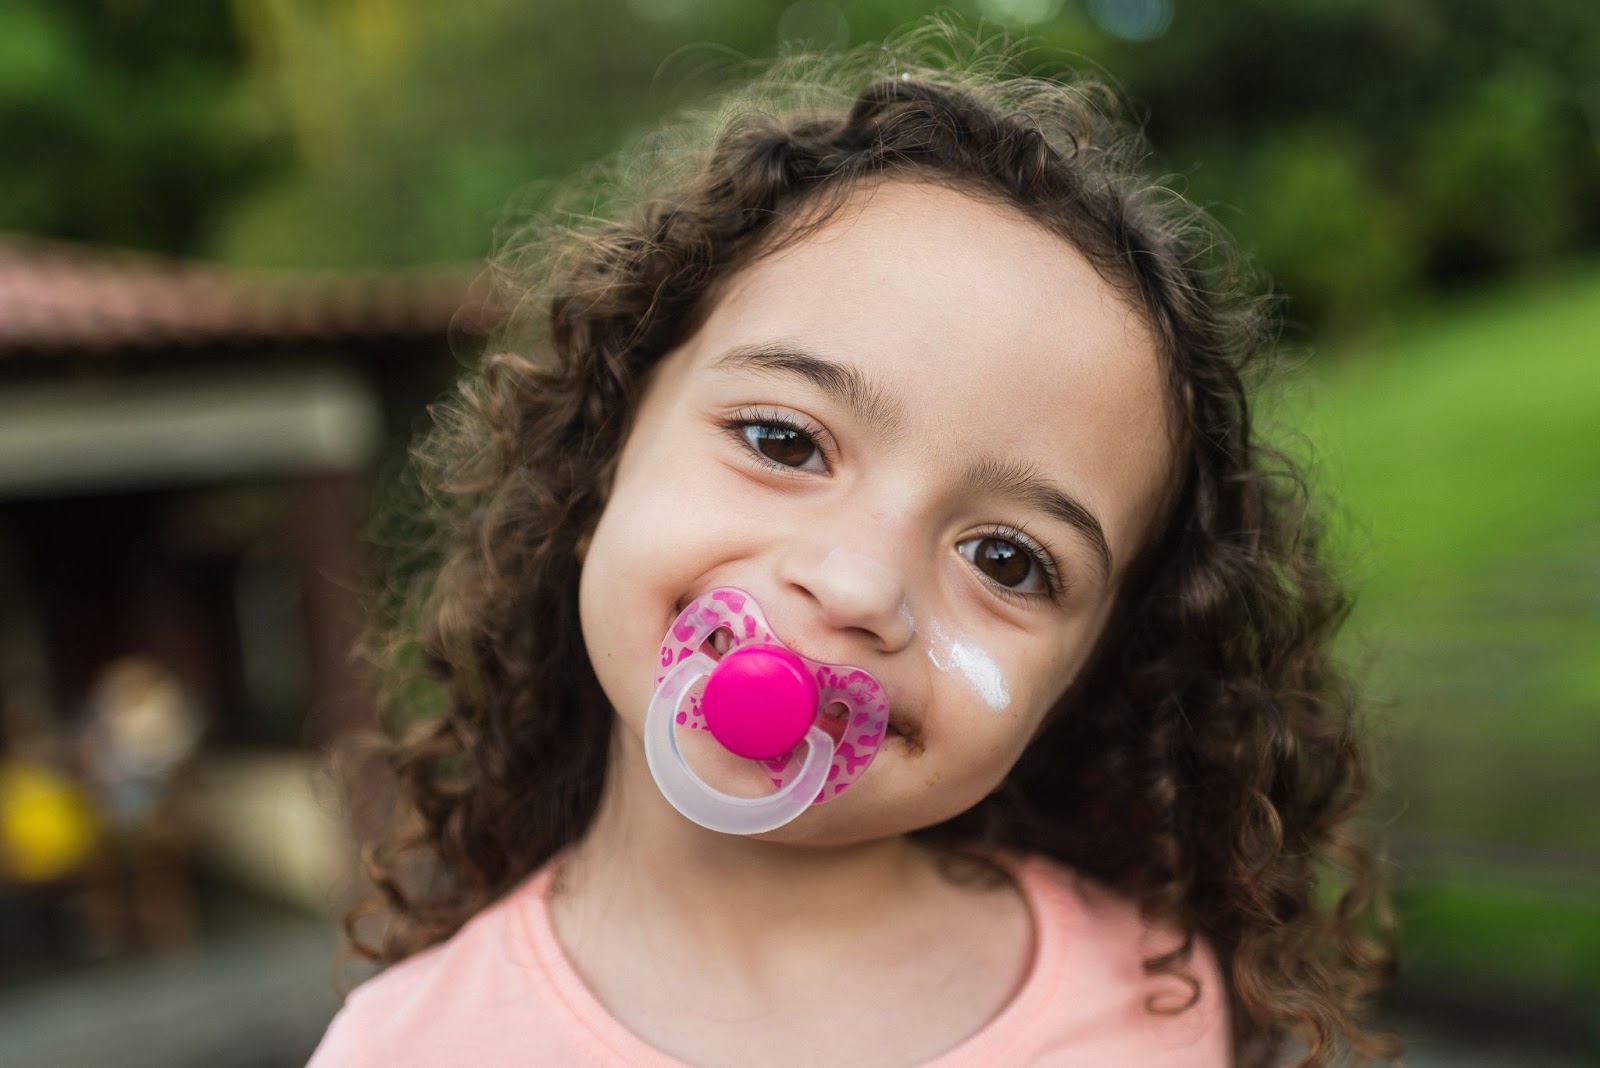 Beyond the cuteness of pacifiers and thumb-sucking, have you ever wondered how these habits can affect your kids' developing smiles?